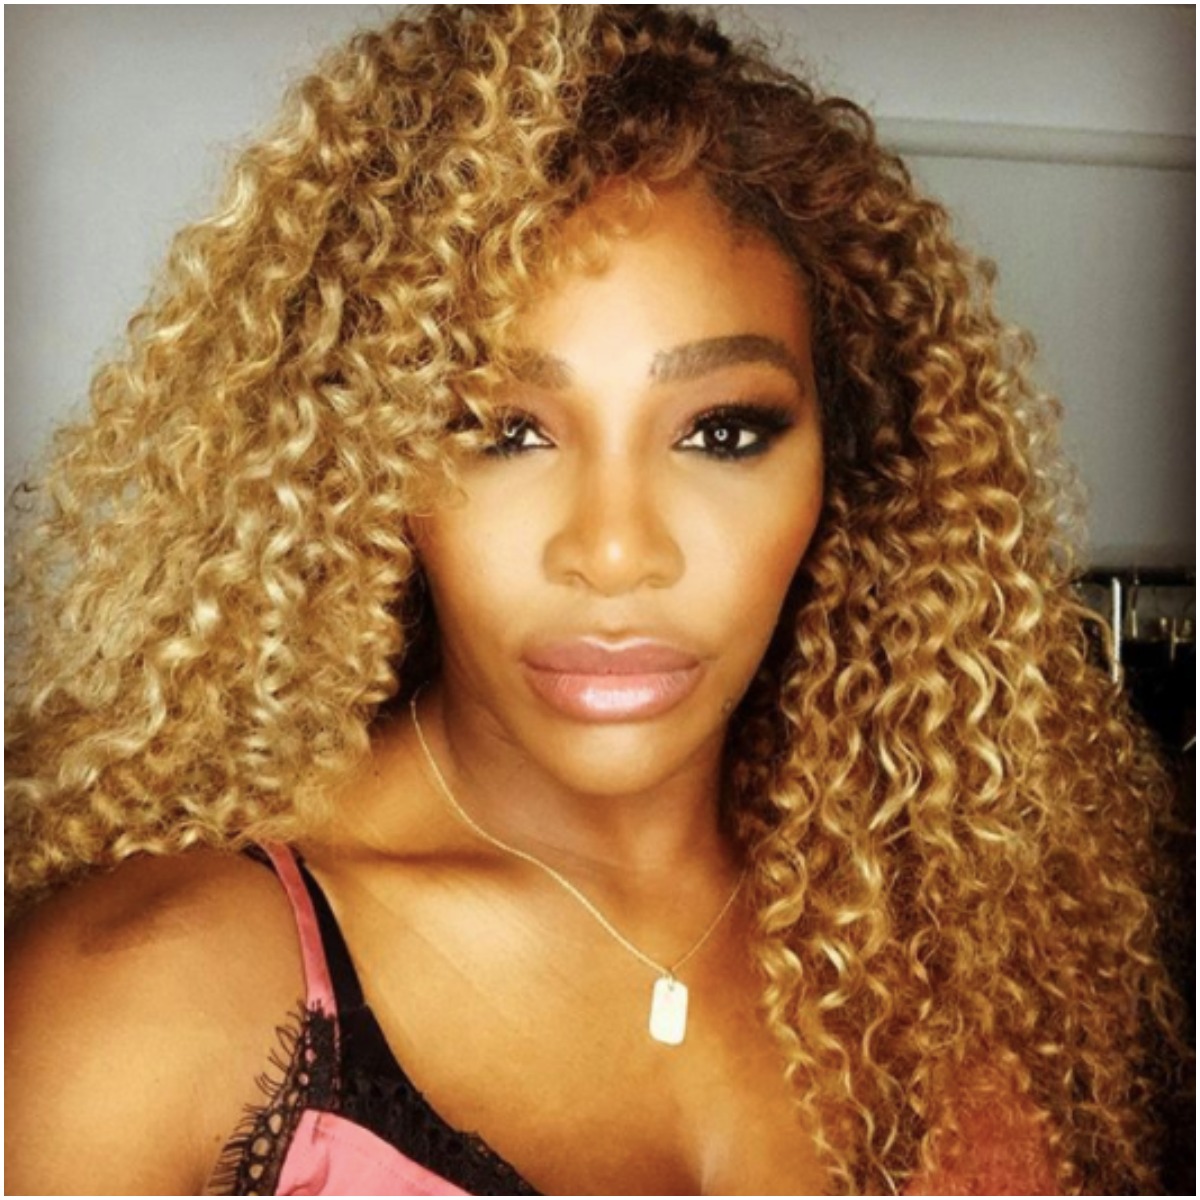 My Usual Beach Attire Too Fans Hype Up Serena Williams After She Wears This Over The Top Look